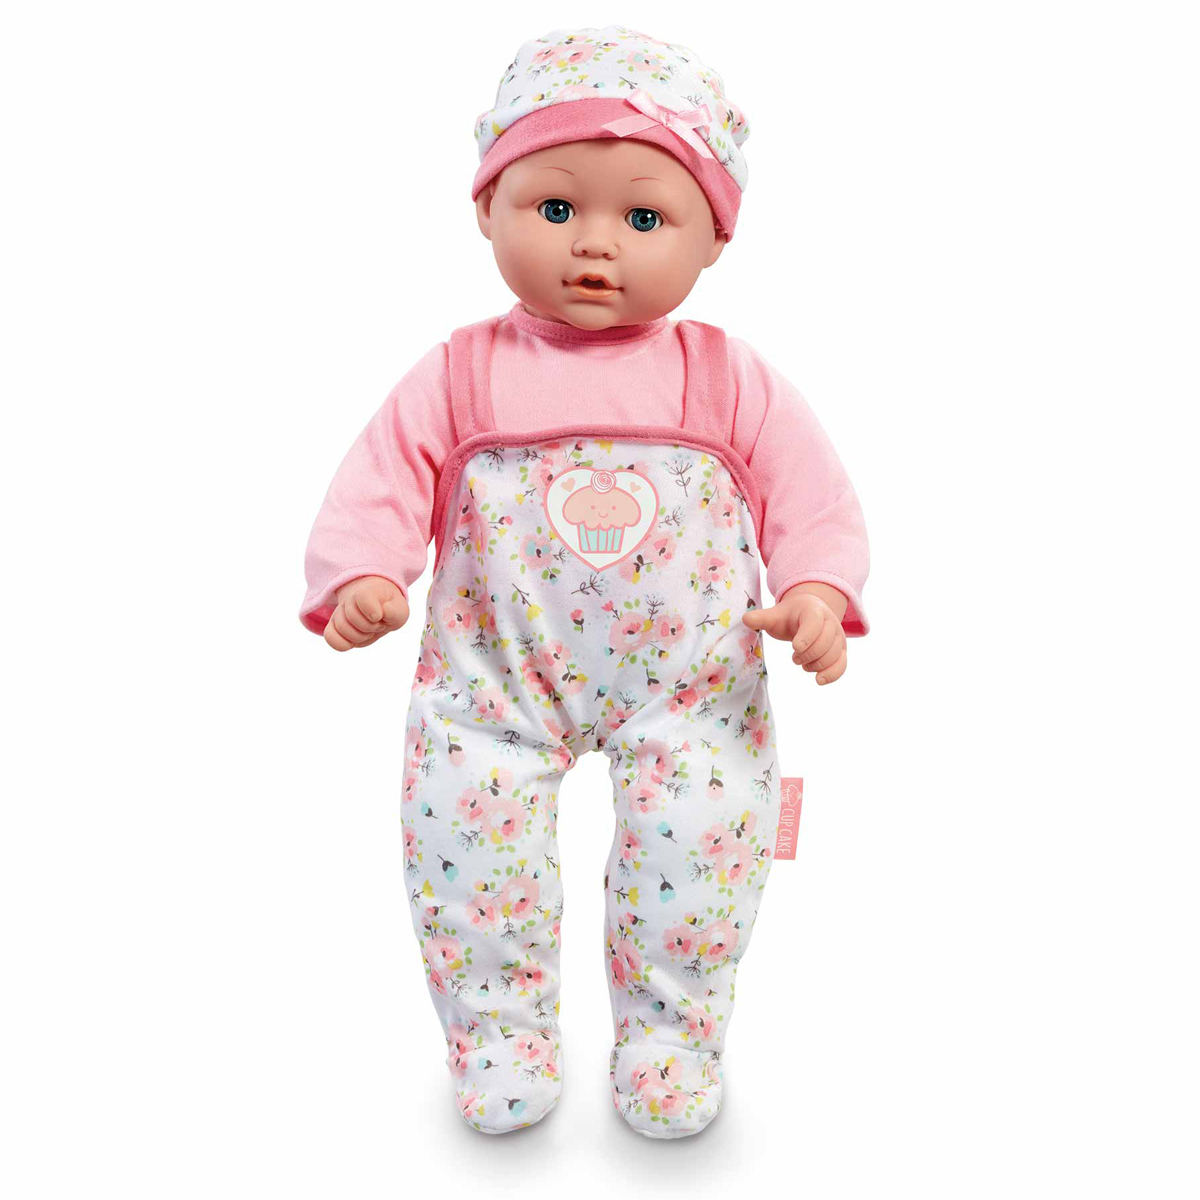 Cupcake Babbling Baby Isla Doll | Early Learning Centre